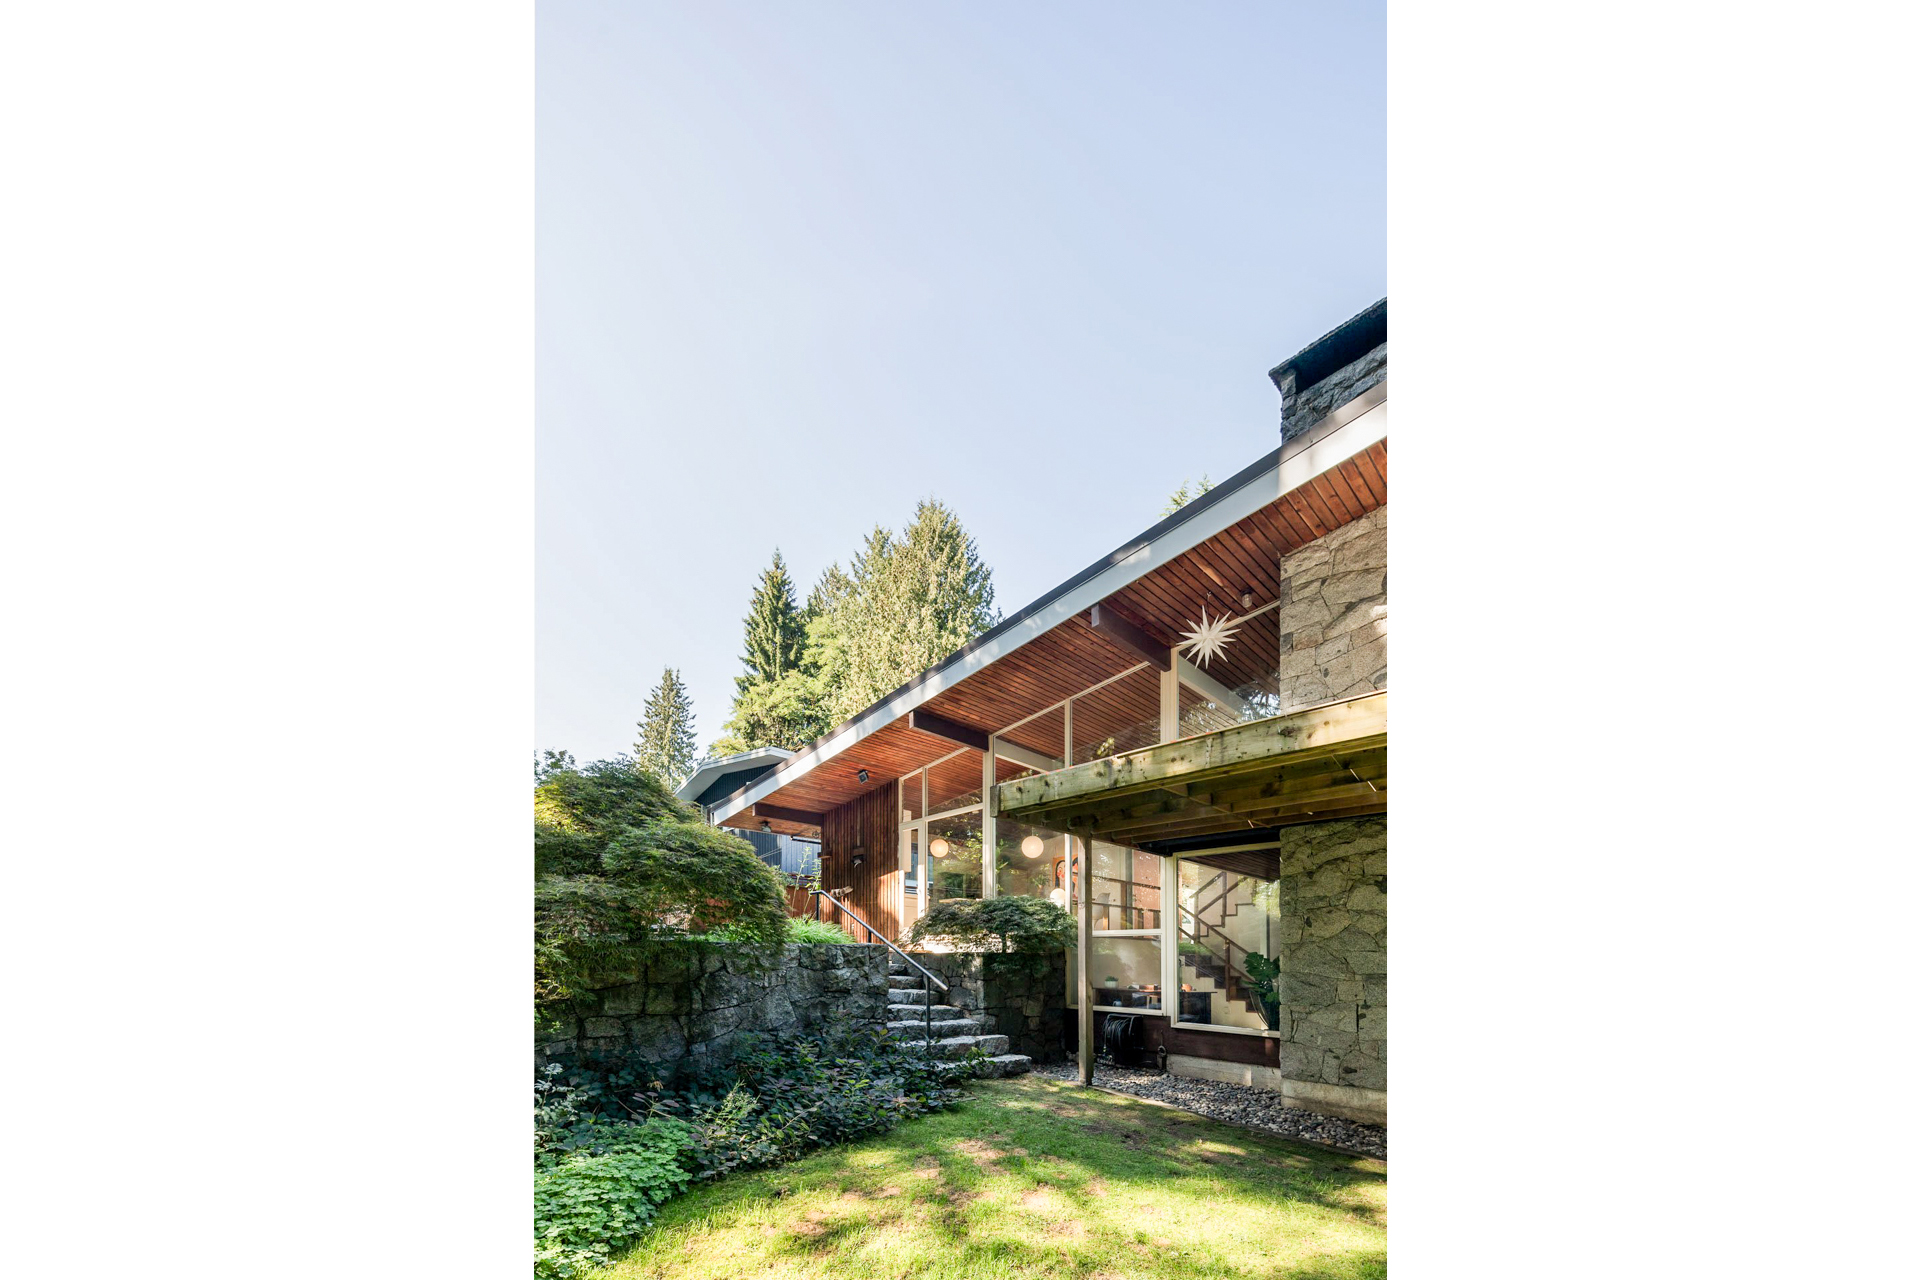 661 East Windsor Road, North Vancouver - sold west coast modern - photo 1